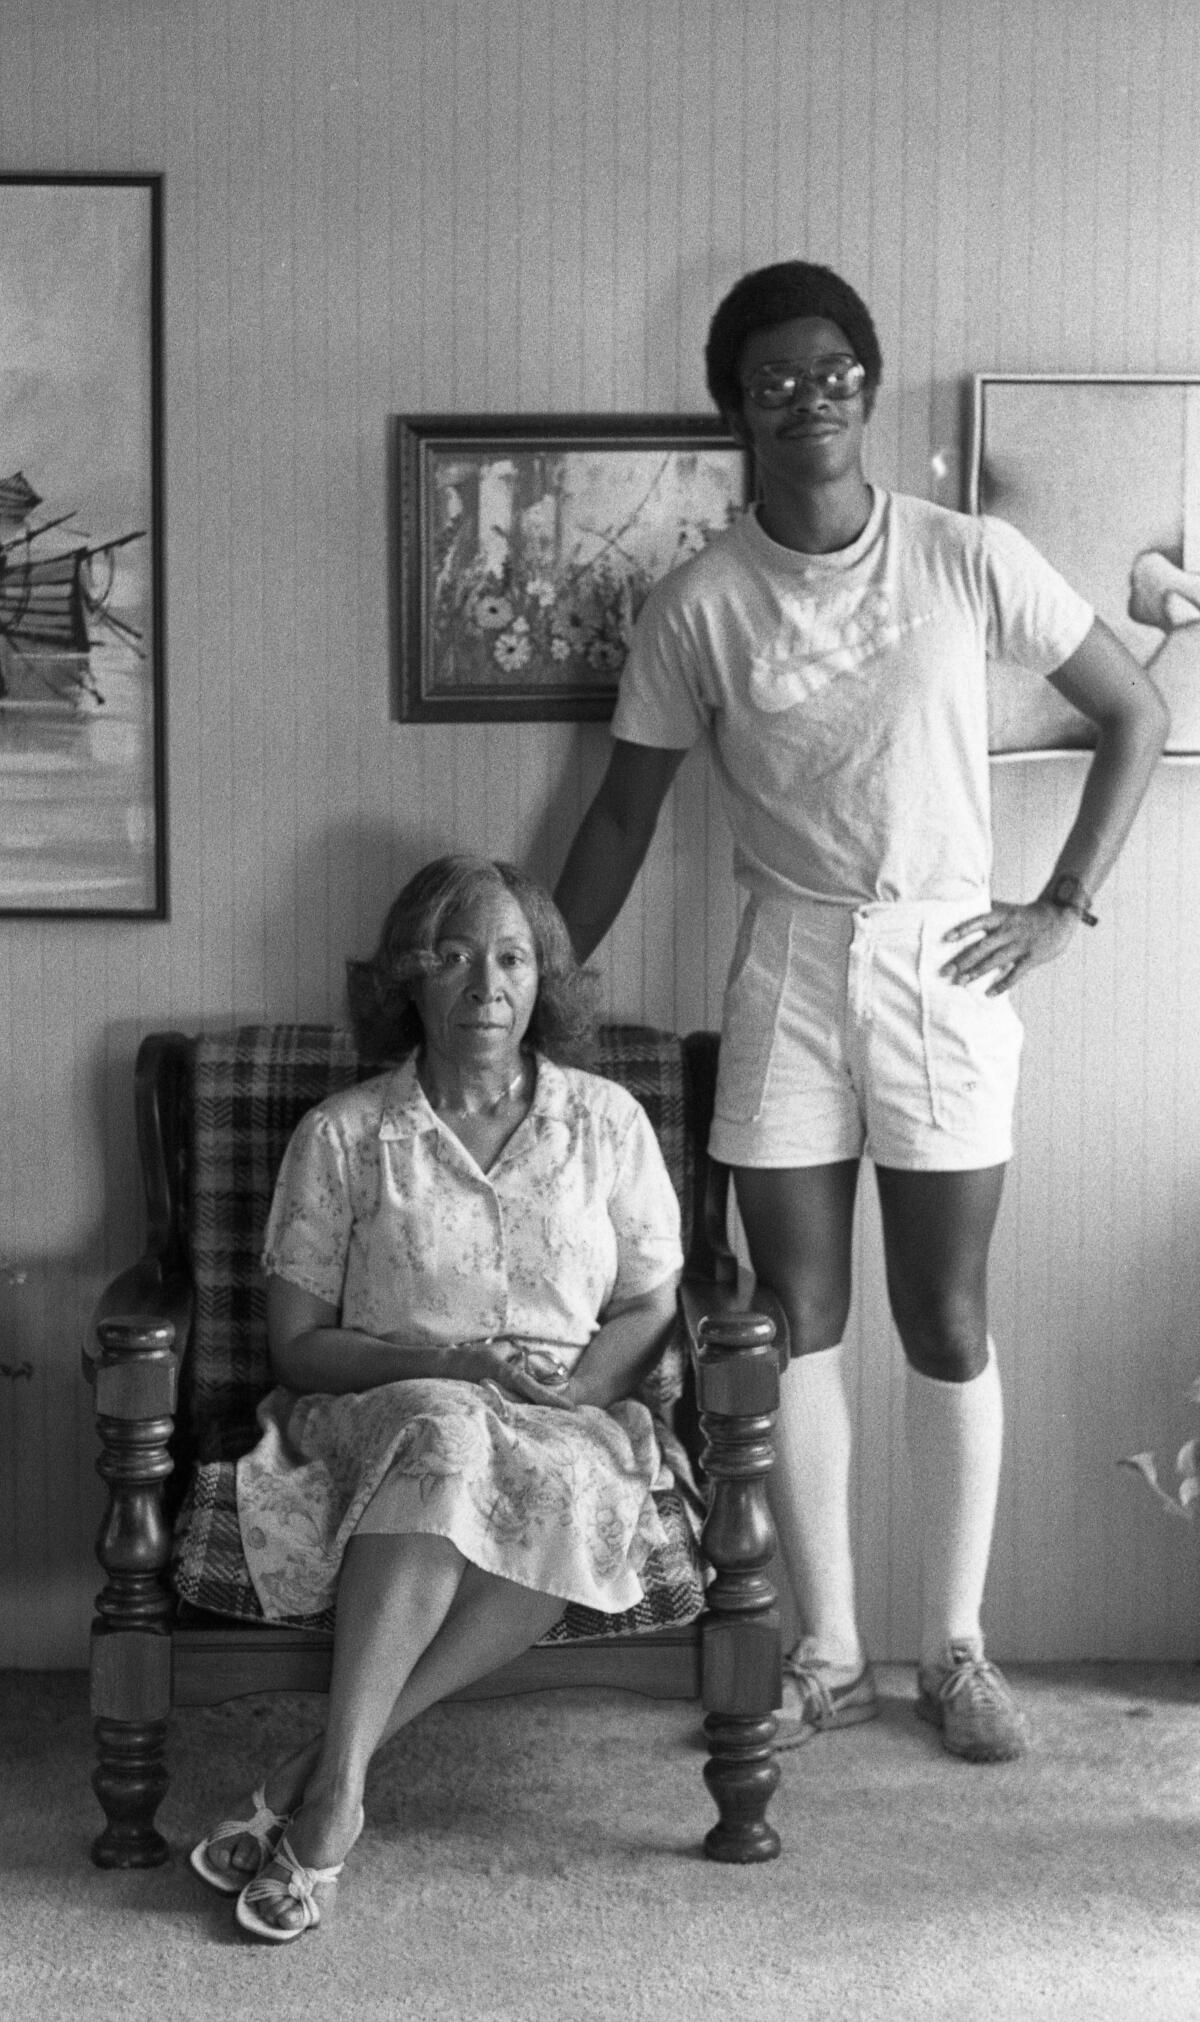 A woman sits in a chair while her son stands beside her